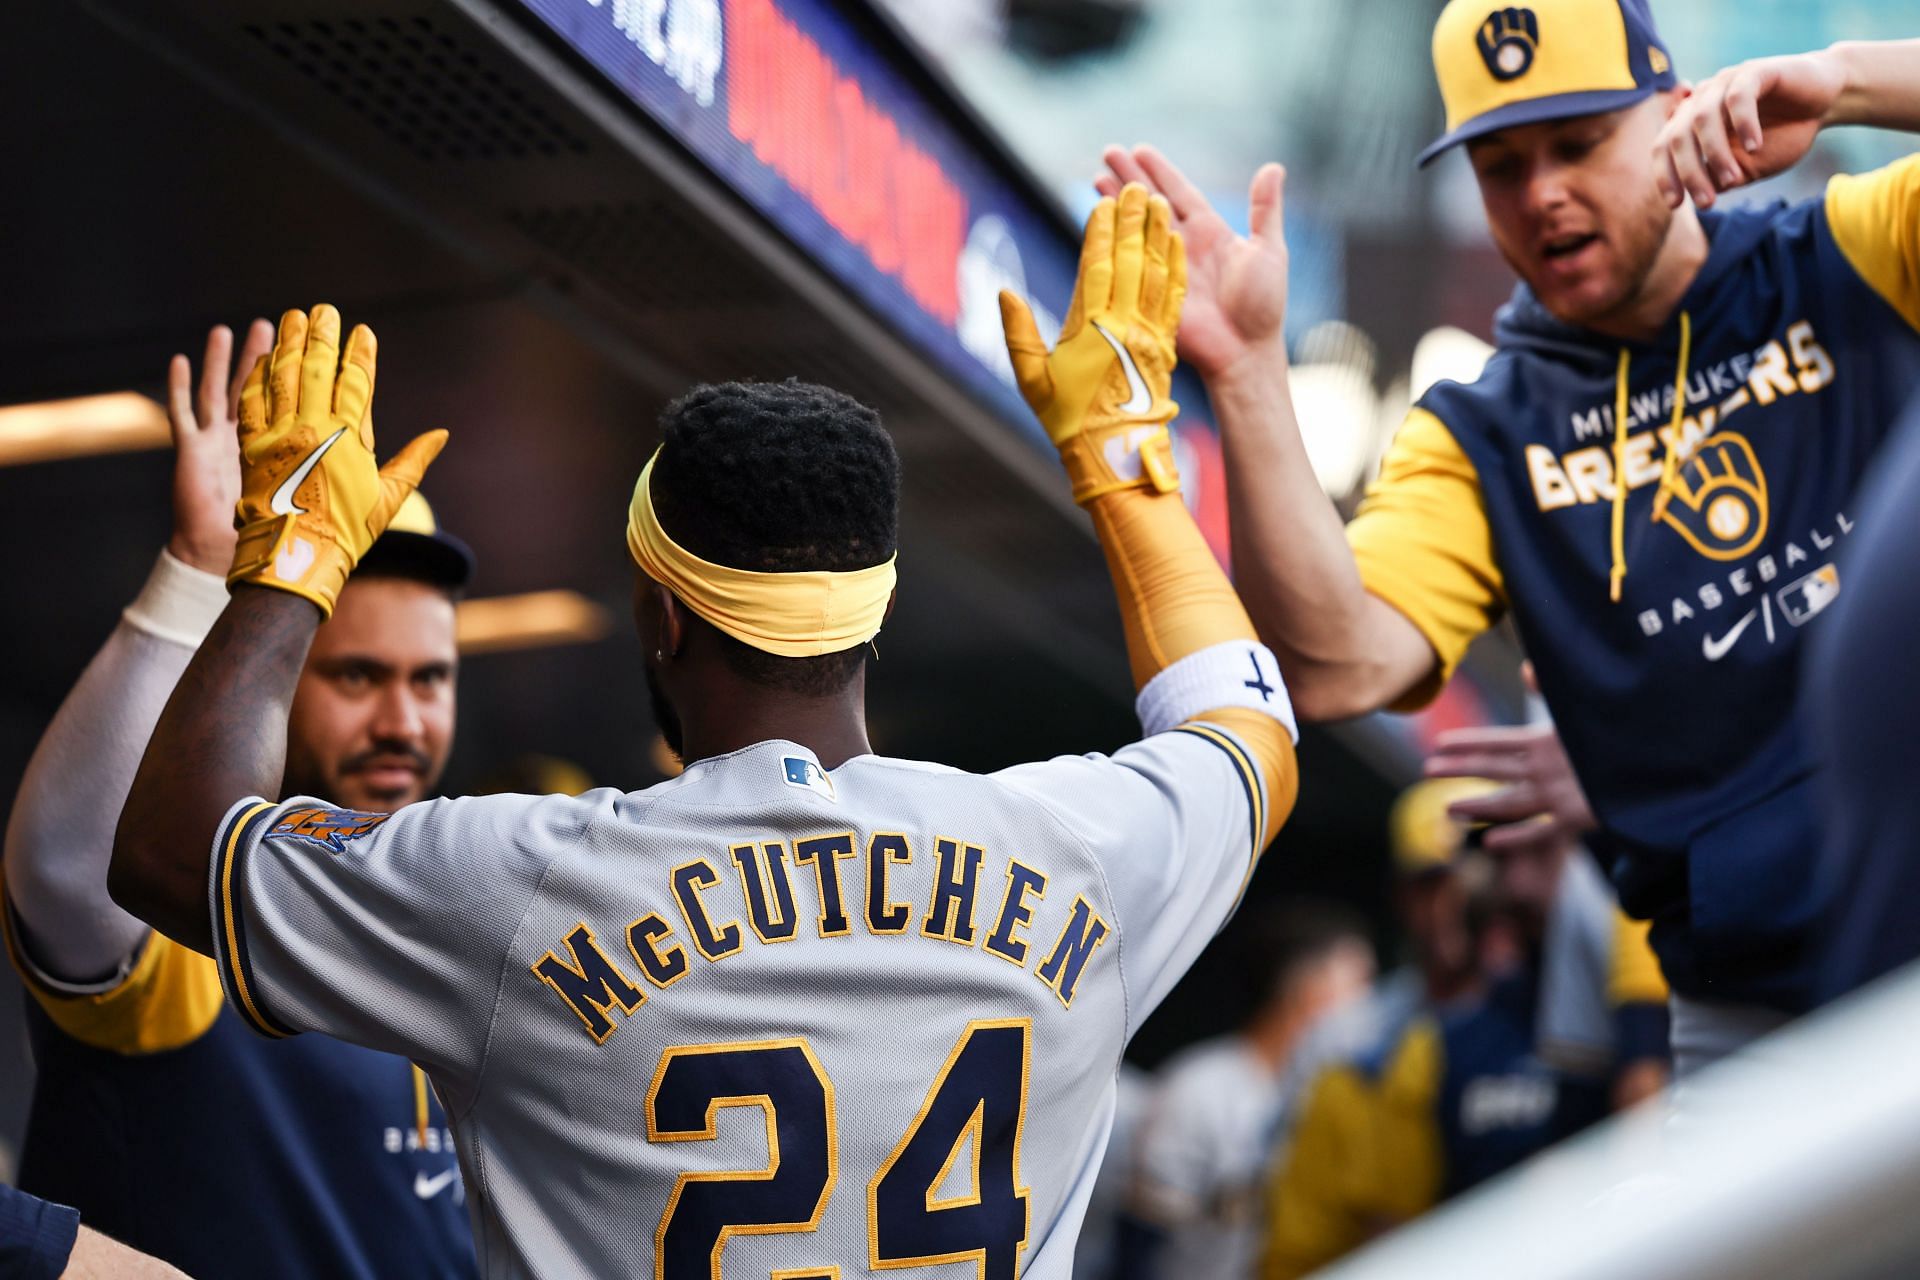 Andrew McCutchen is greeted by teammates in the dugout after scoring a run at Citi Field